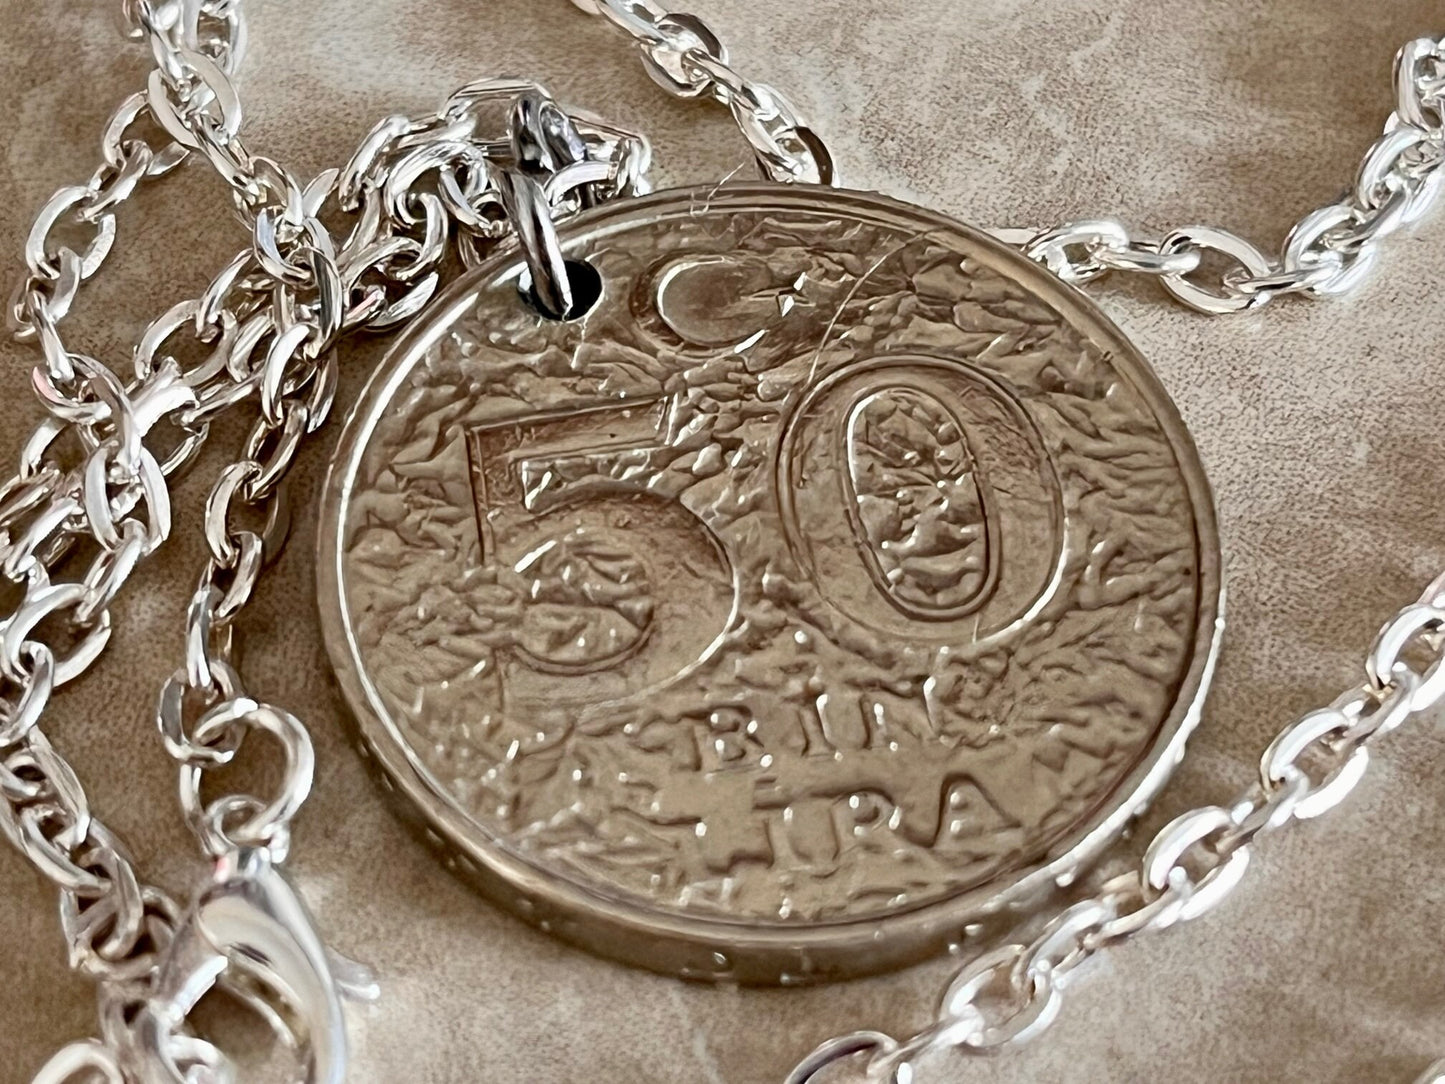 Turkey Coin Necklace Turkish Bib 50 Lira Pendant Personal Old Vintage Handmade Jewelry Gift Friend Charm For Him Her World Coin Collector